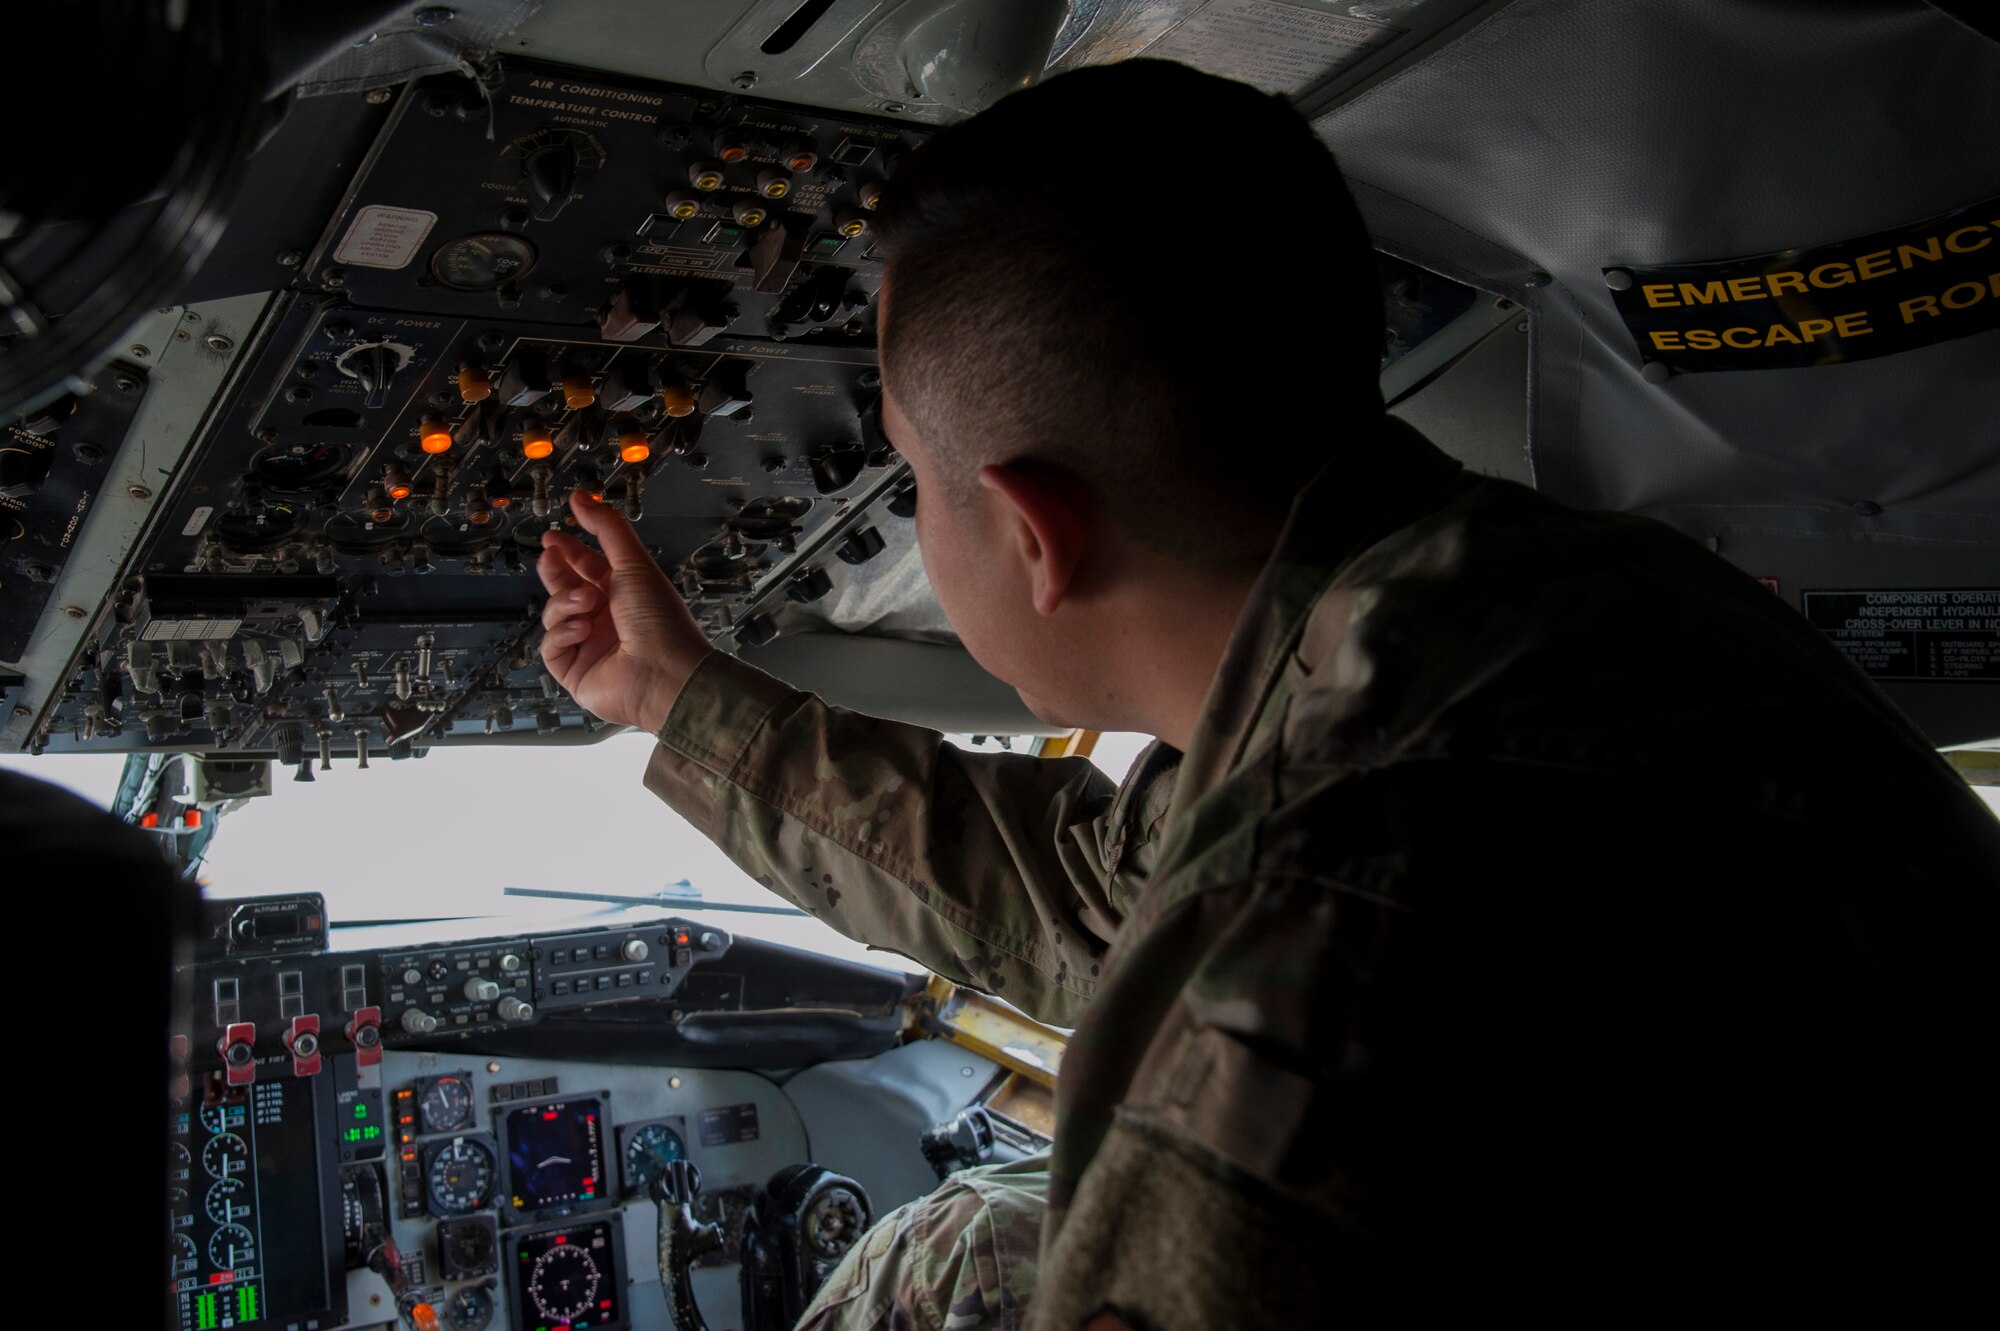 U.S. Air Force Senior Airman Eric Flores, a 6th Aircraft Maintenance Squadron electrical and environmental systems journeyman, changes a lightbulb on the overhead control panel of a KC-135 Stratotanker, Jan. 23, 2020, at MacDill Air Force Base, Fla.  Electrical and environmental systems Airmen are responsible for maintaining and repairing aircraft wiring and electrical components.